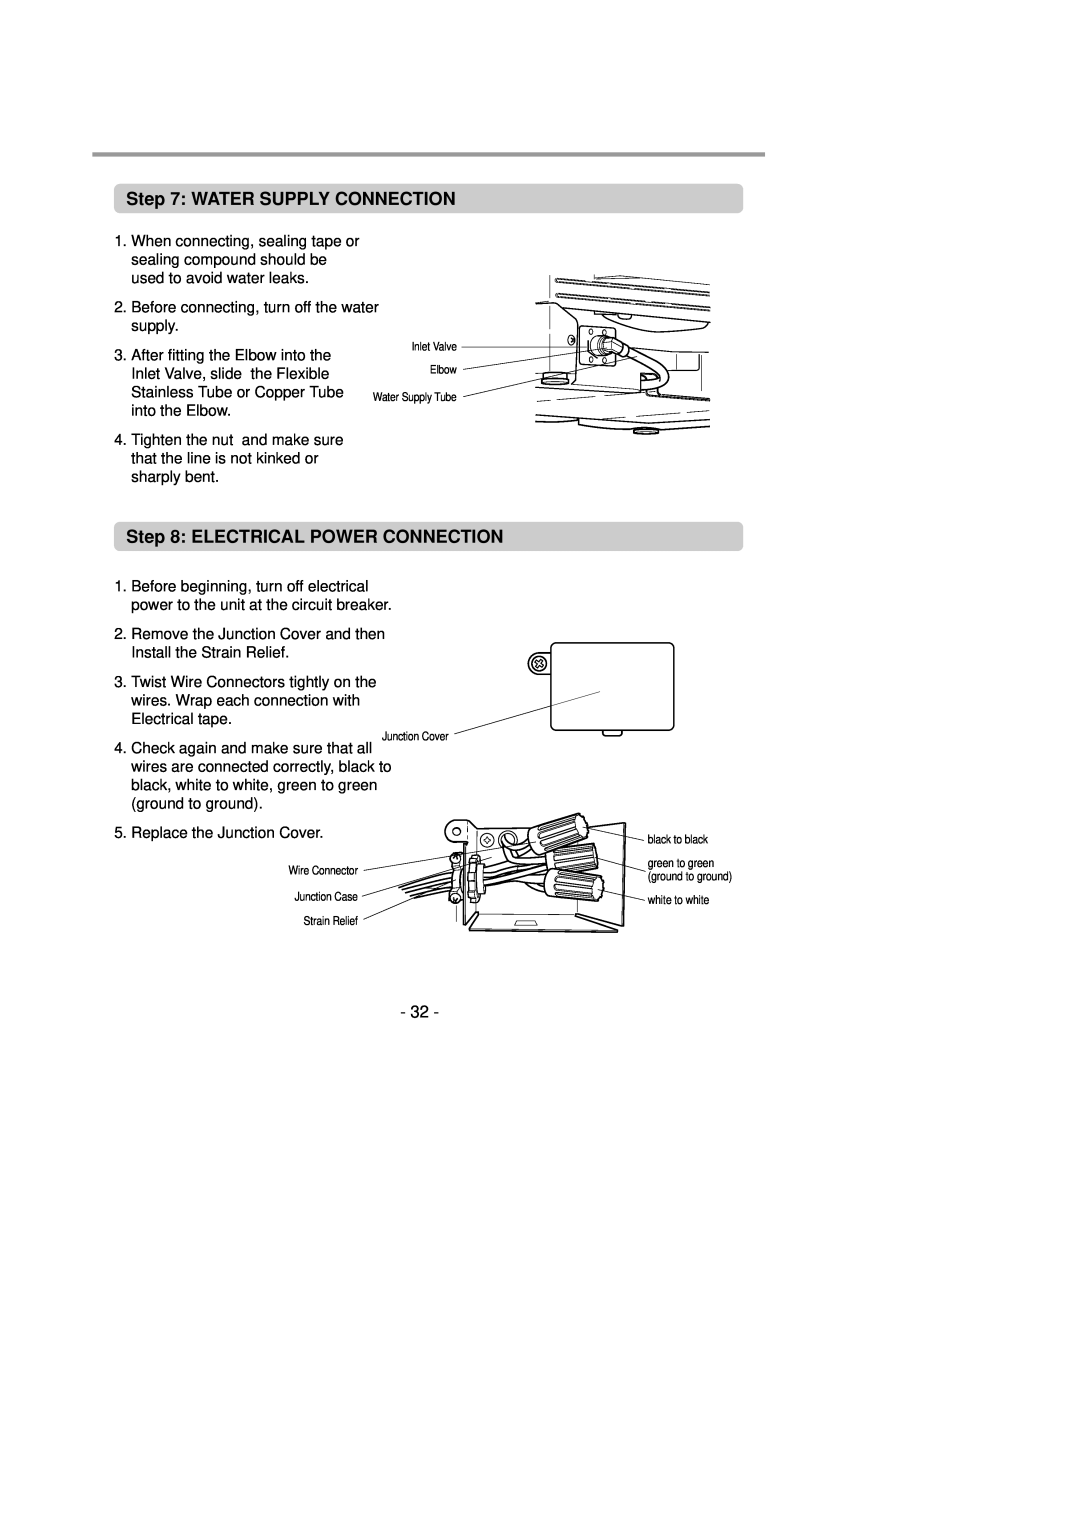 LG Electronics LDS4821(WW service manual Water Supply Connection, Electrical Power Connection 